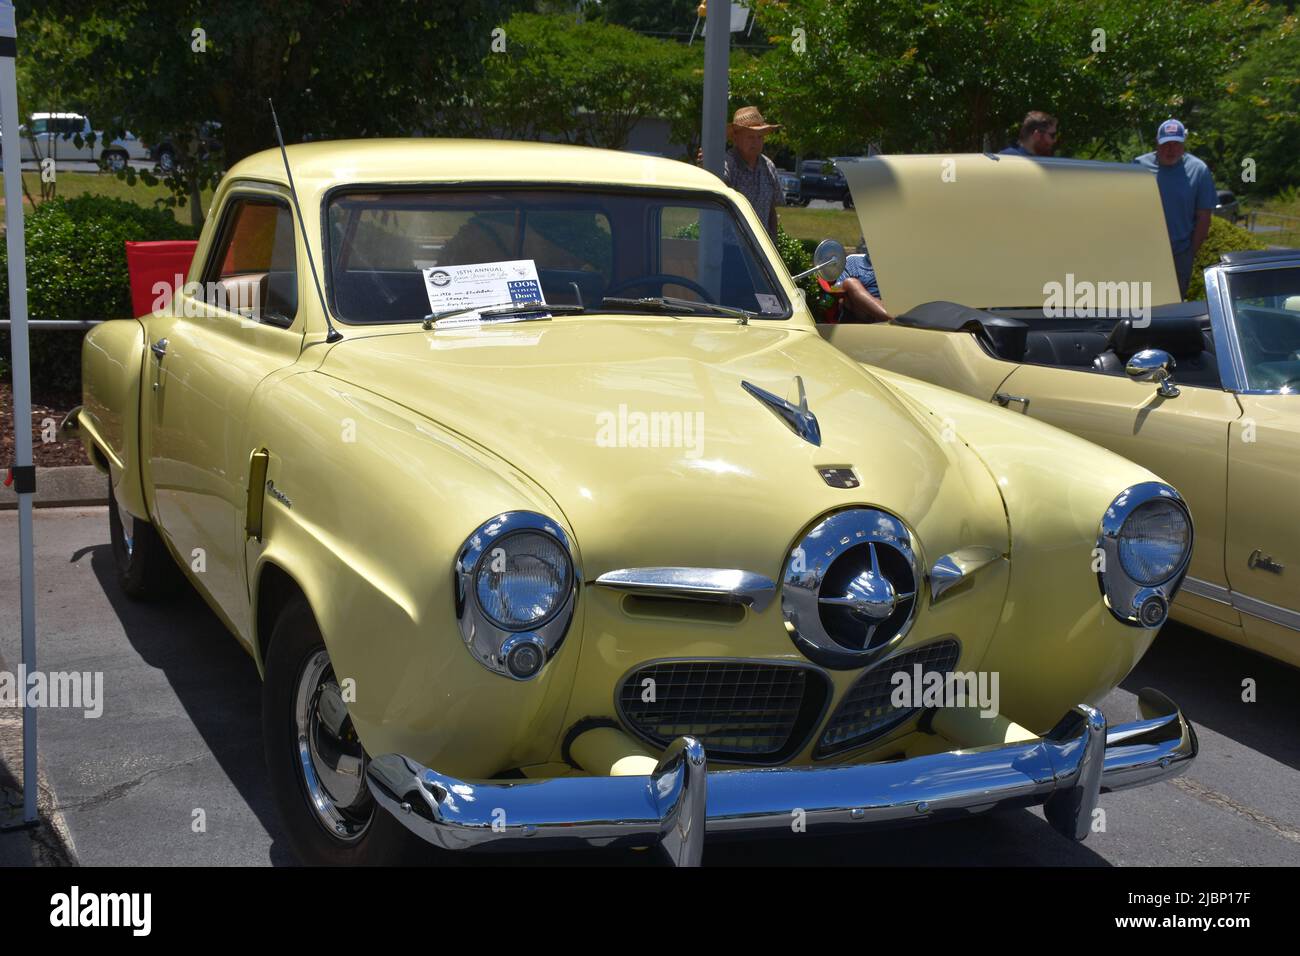 A 1950 Studebaker Champion on display at a car show. Stock Photo